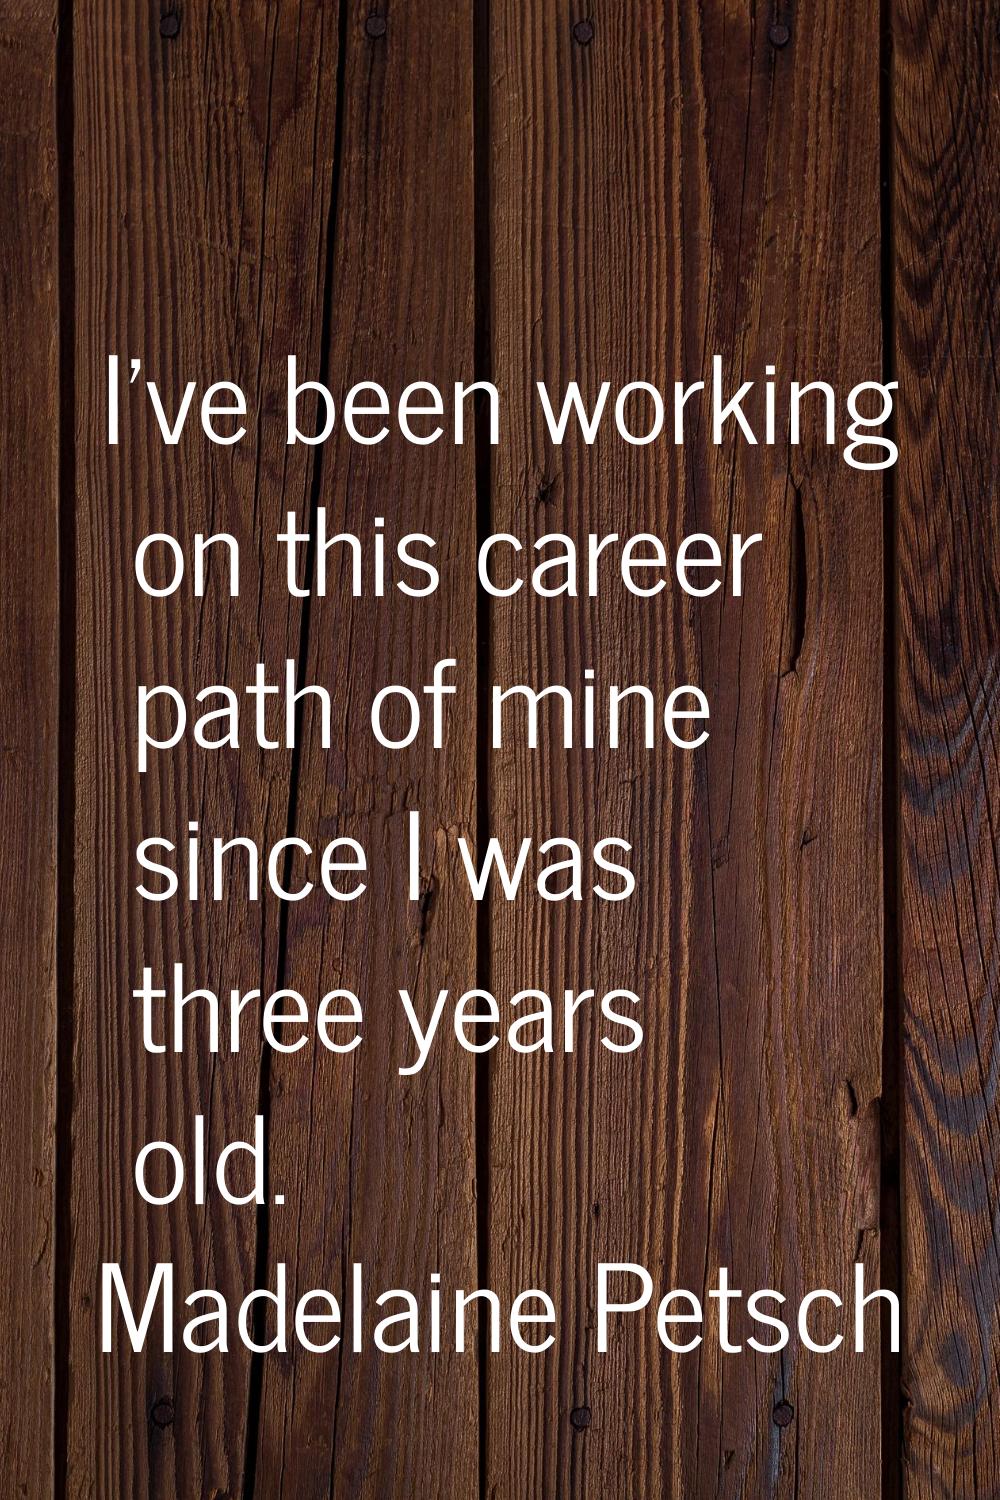 I've been working on this career path of mine since I was three years old.